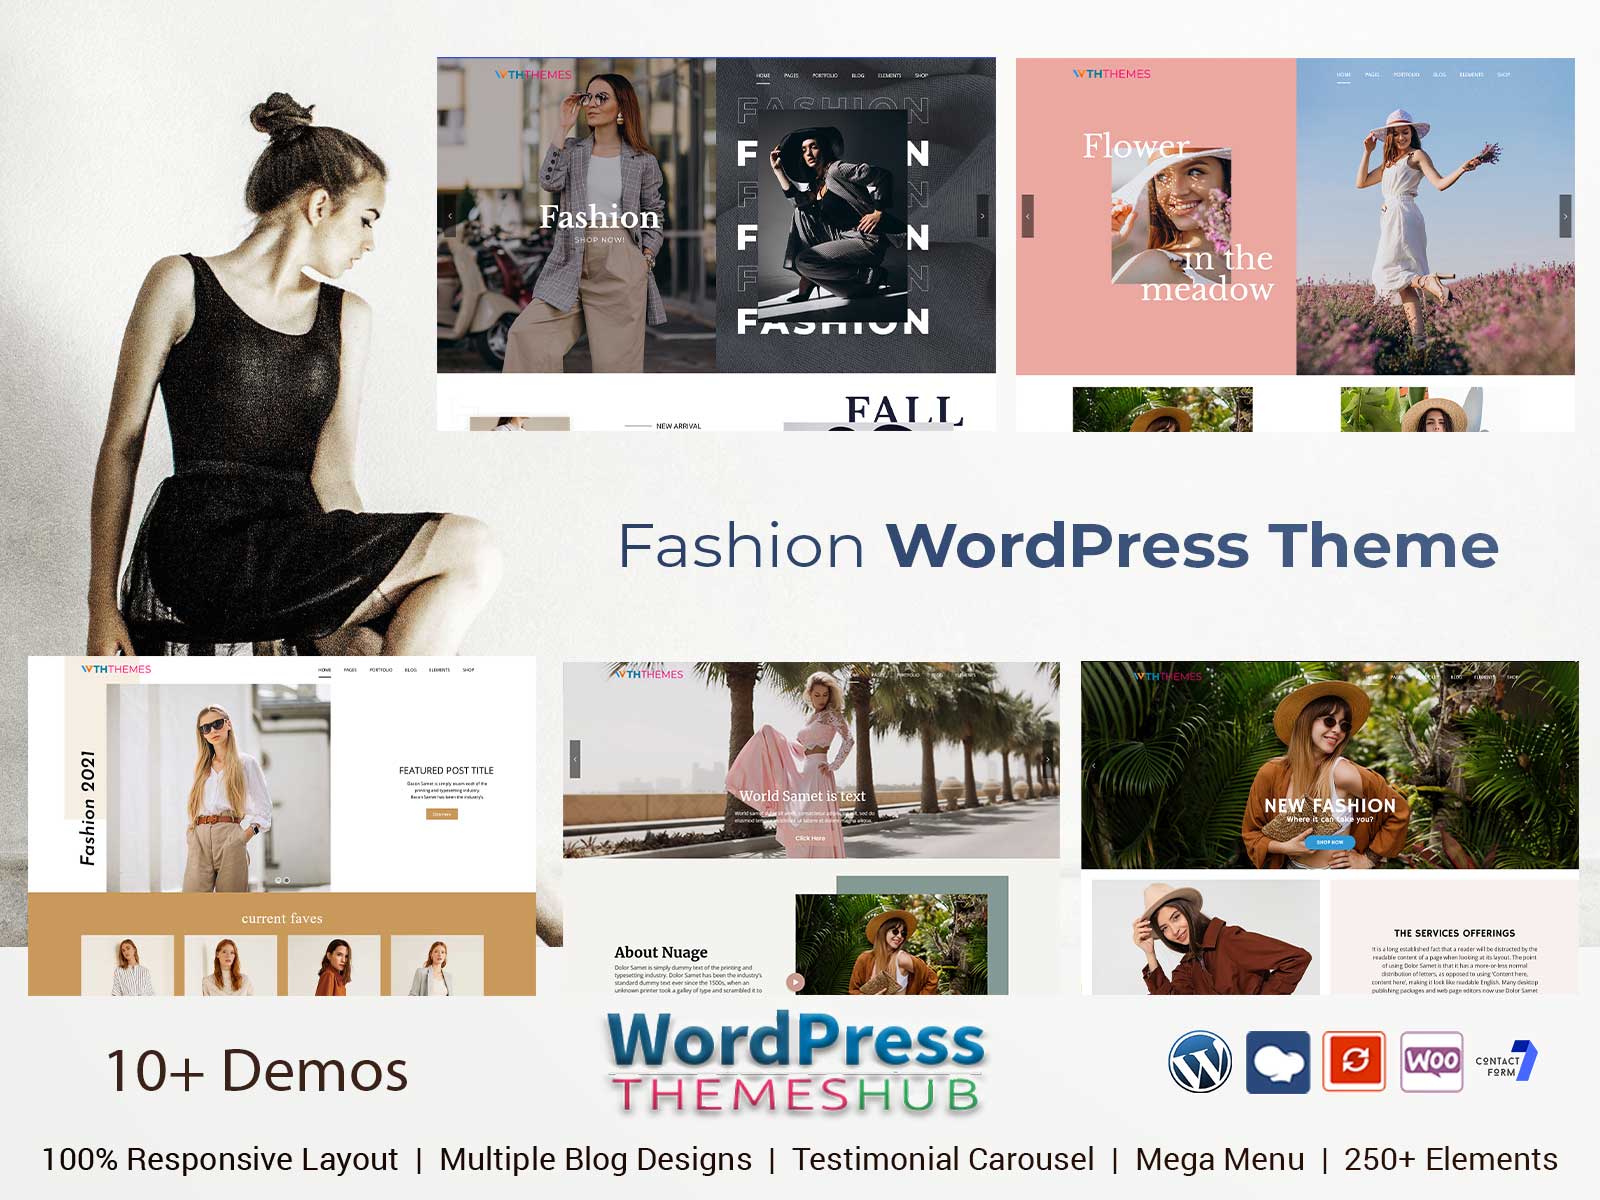 Fashion WordPress Themes For Small To Medium Business Owners